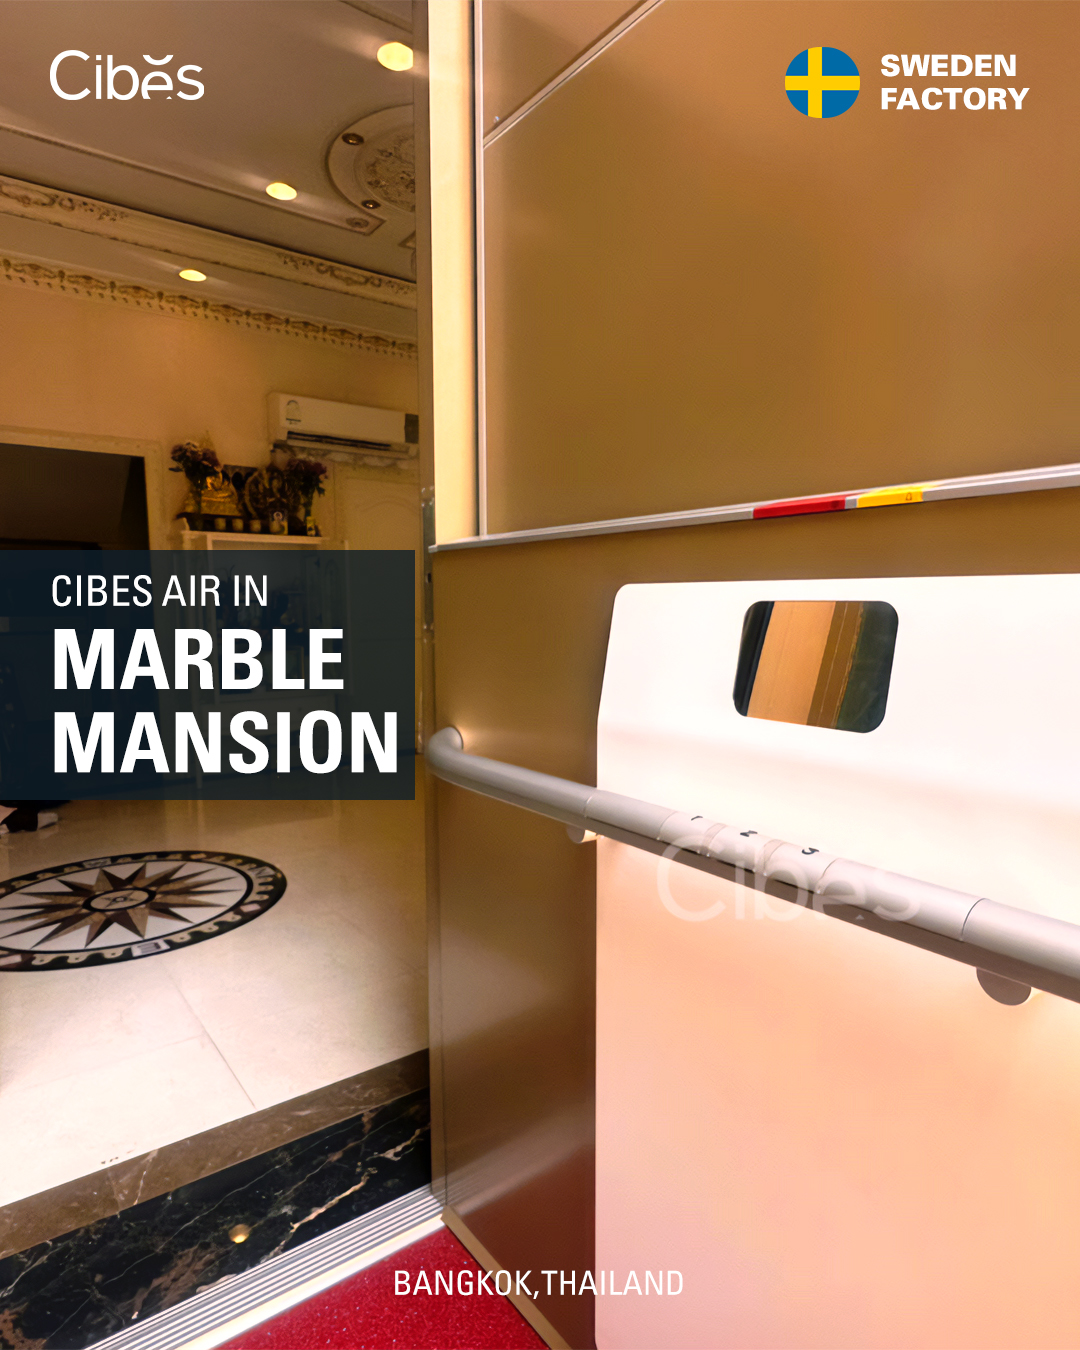 Cibes Air in Marble Mansion